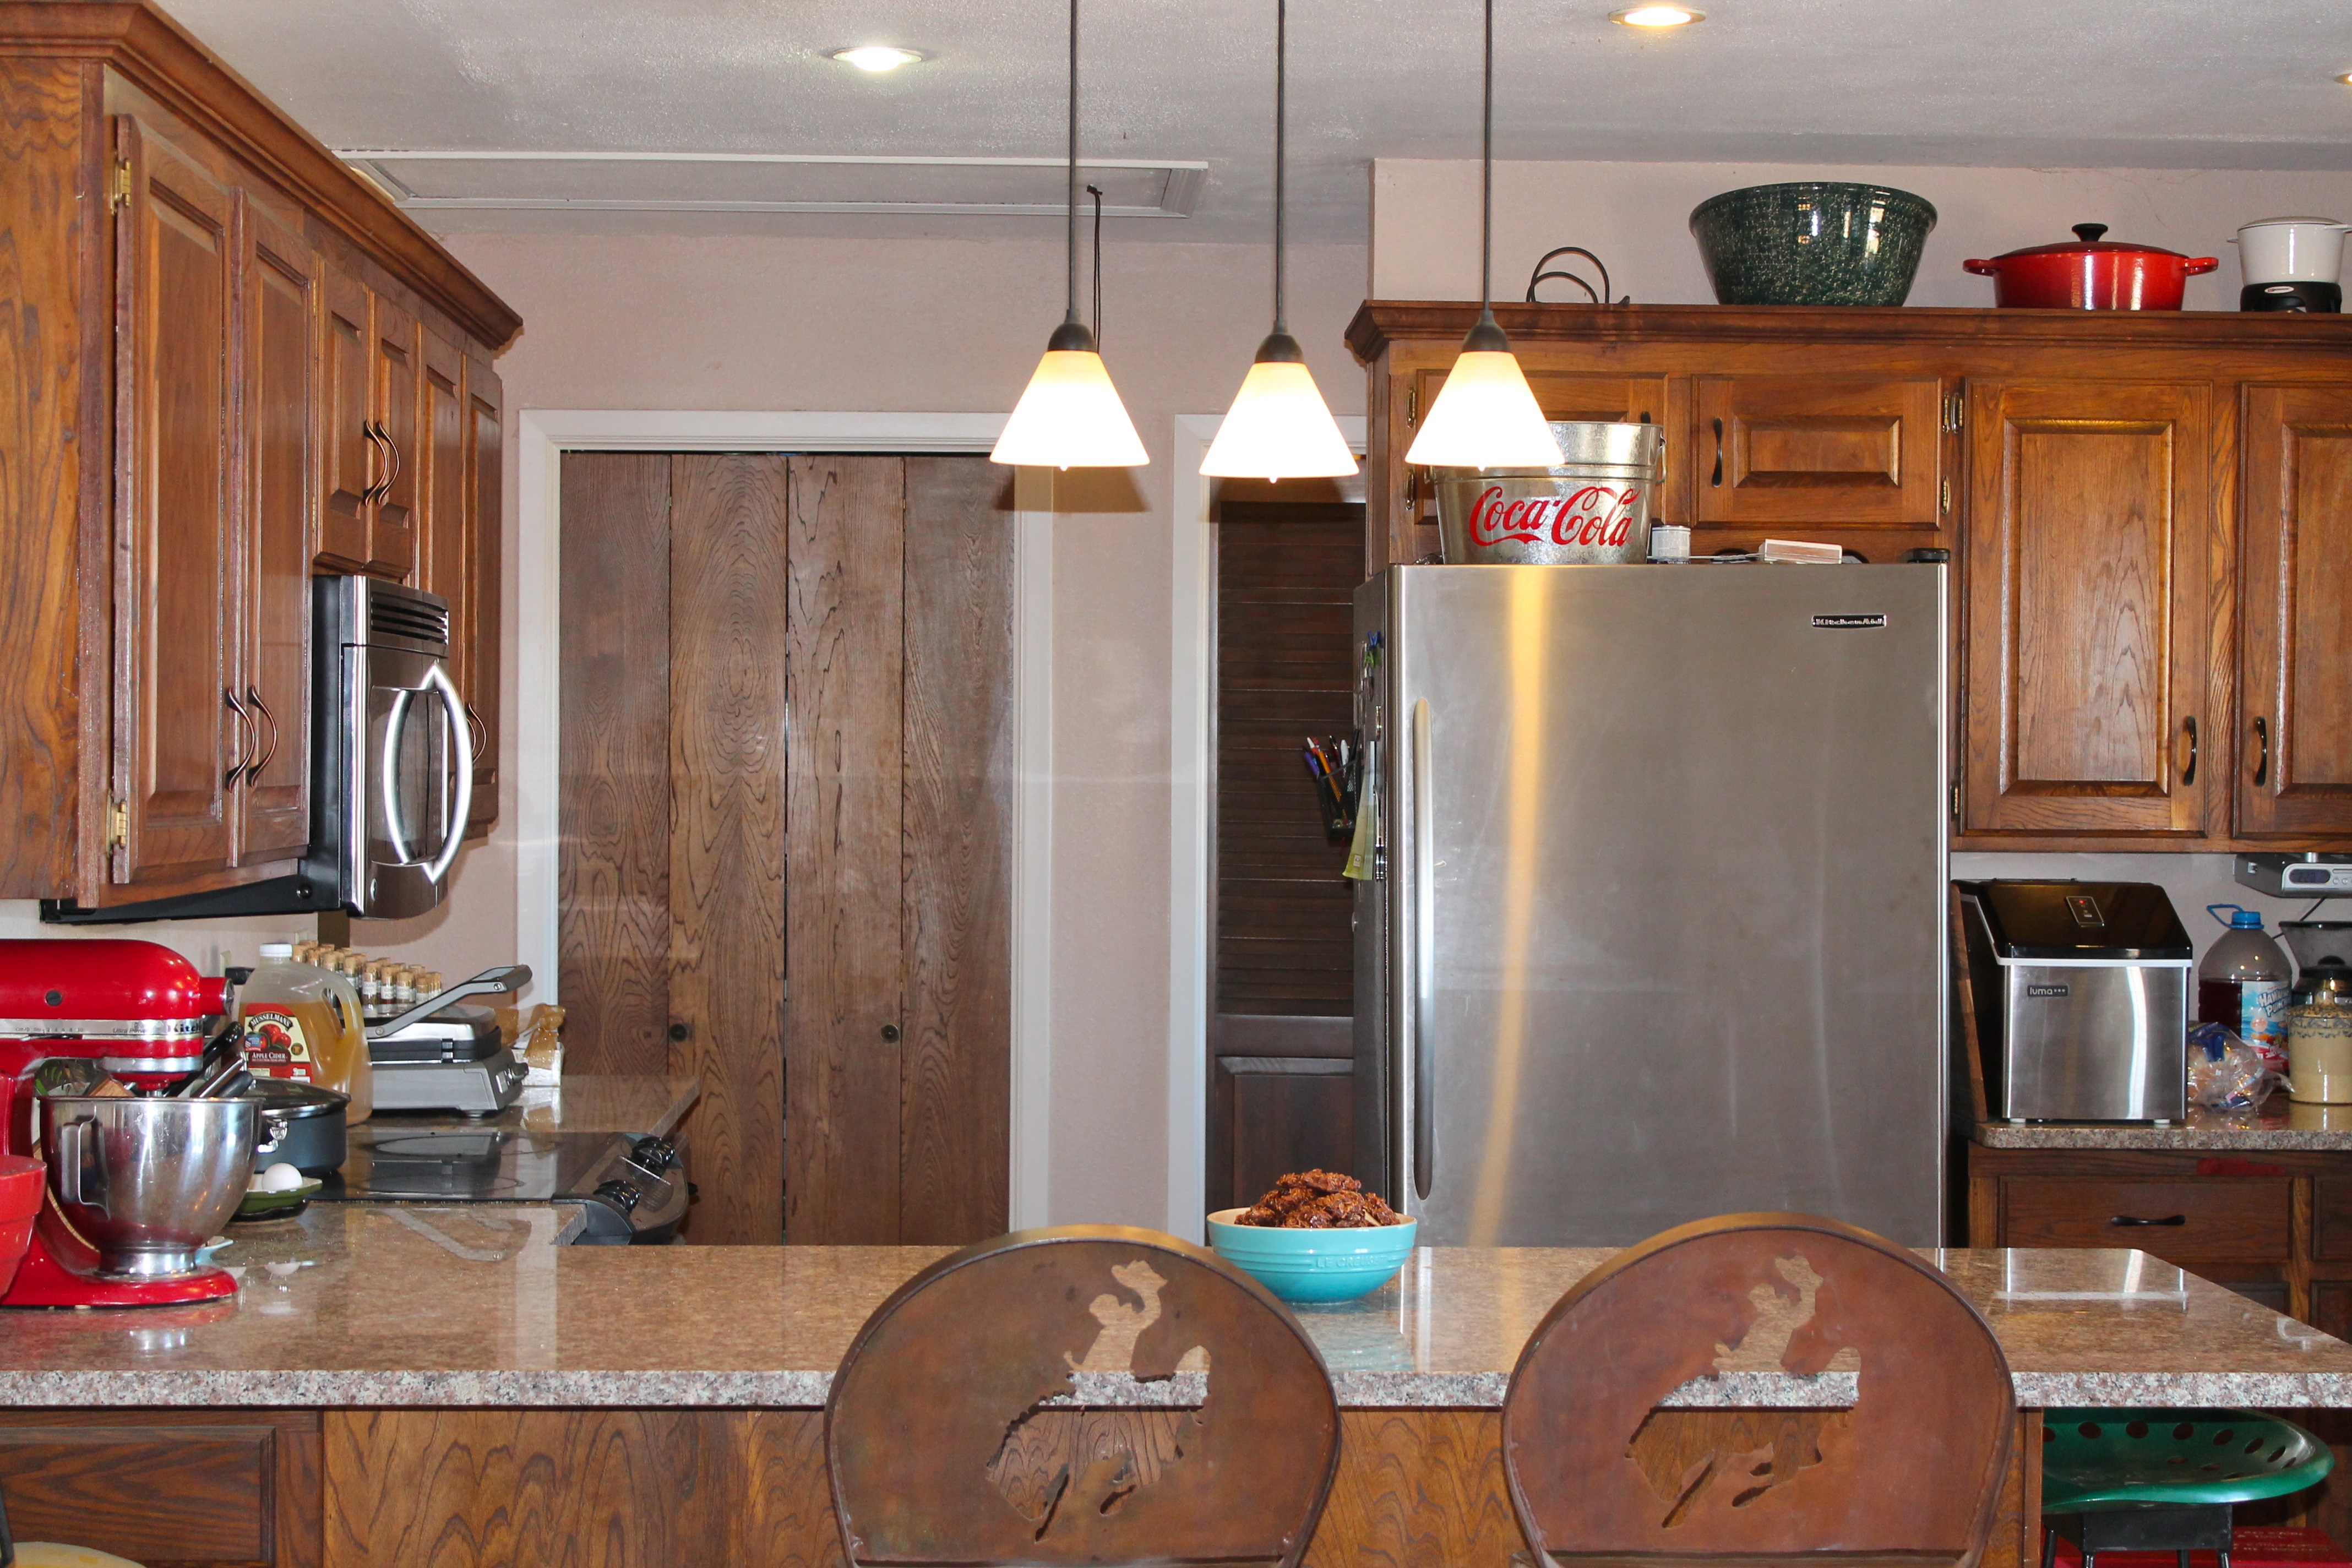 View of Refrigerator and Bar